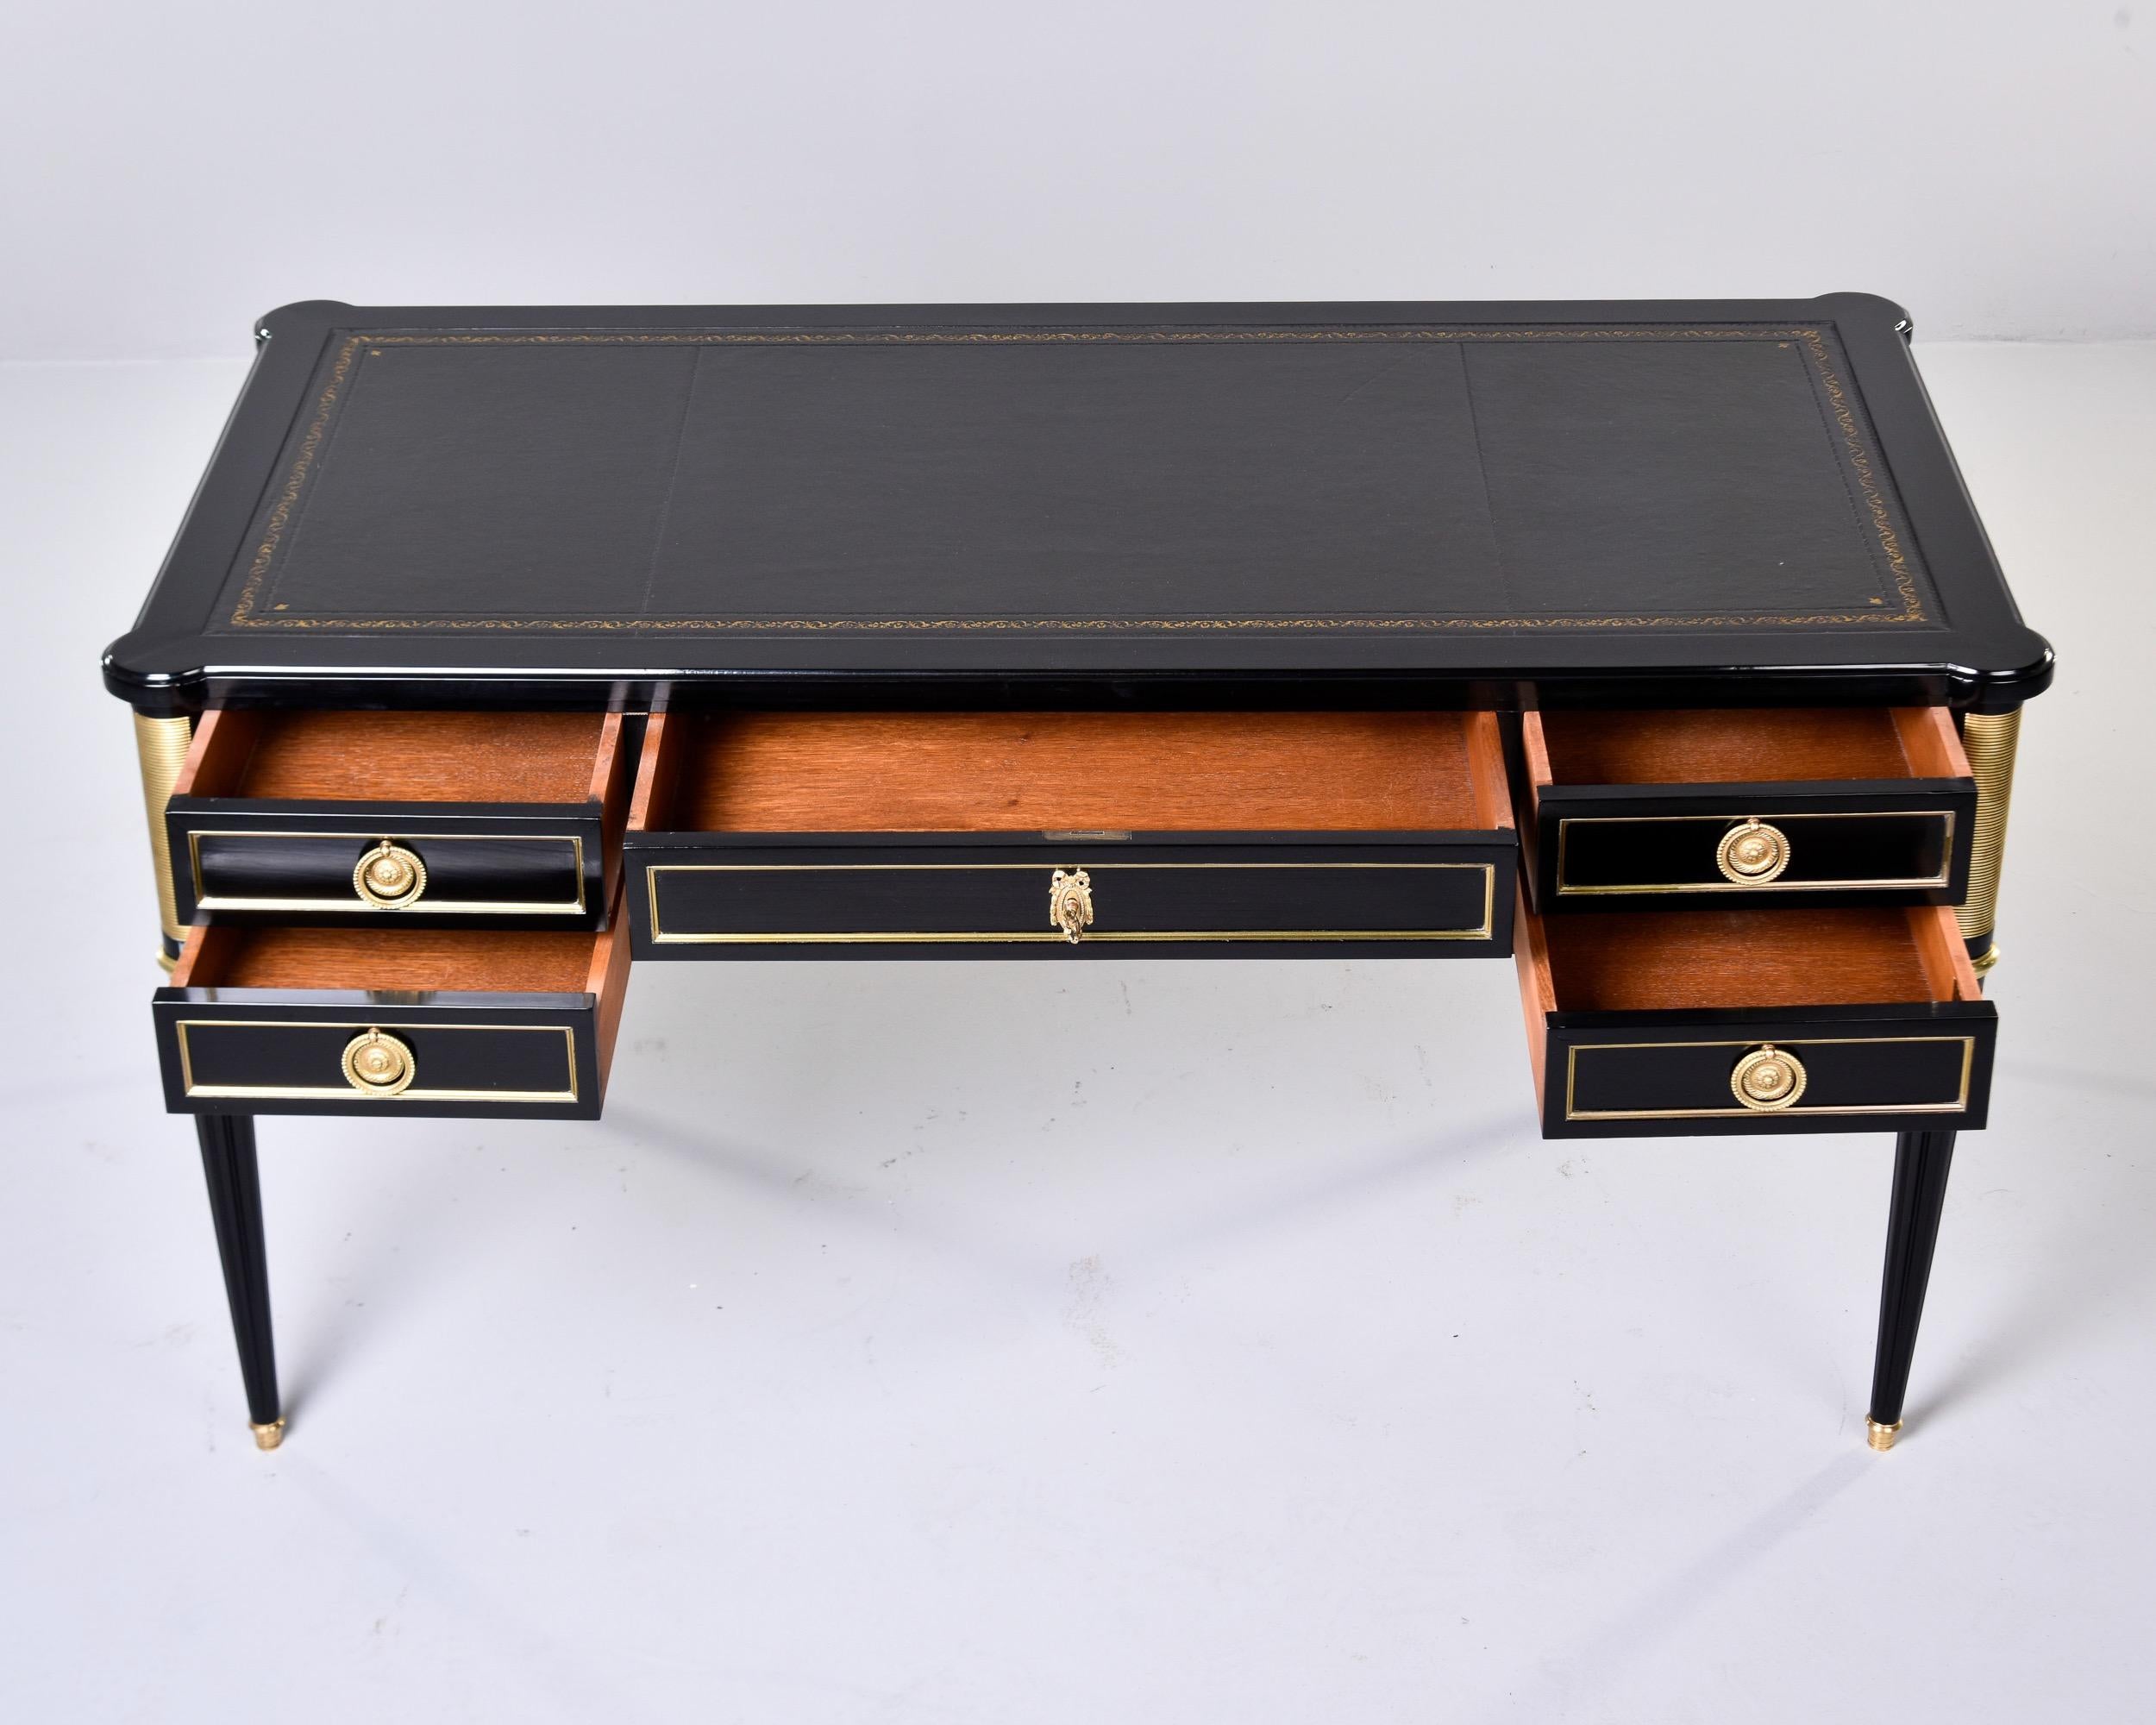 19th C Louis XVI Style Ebonised Desk with Brass Mounts and New Leather Top  In Good Condition For Sale In Troy, MI